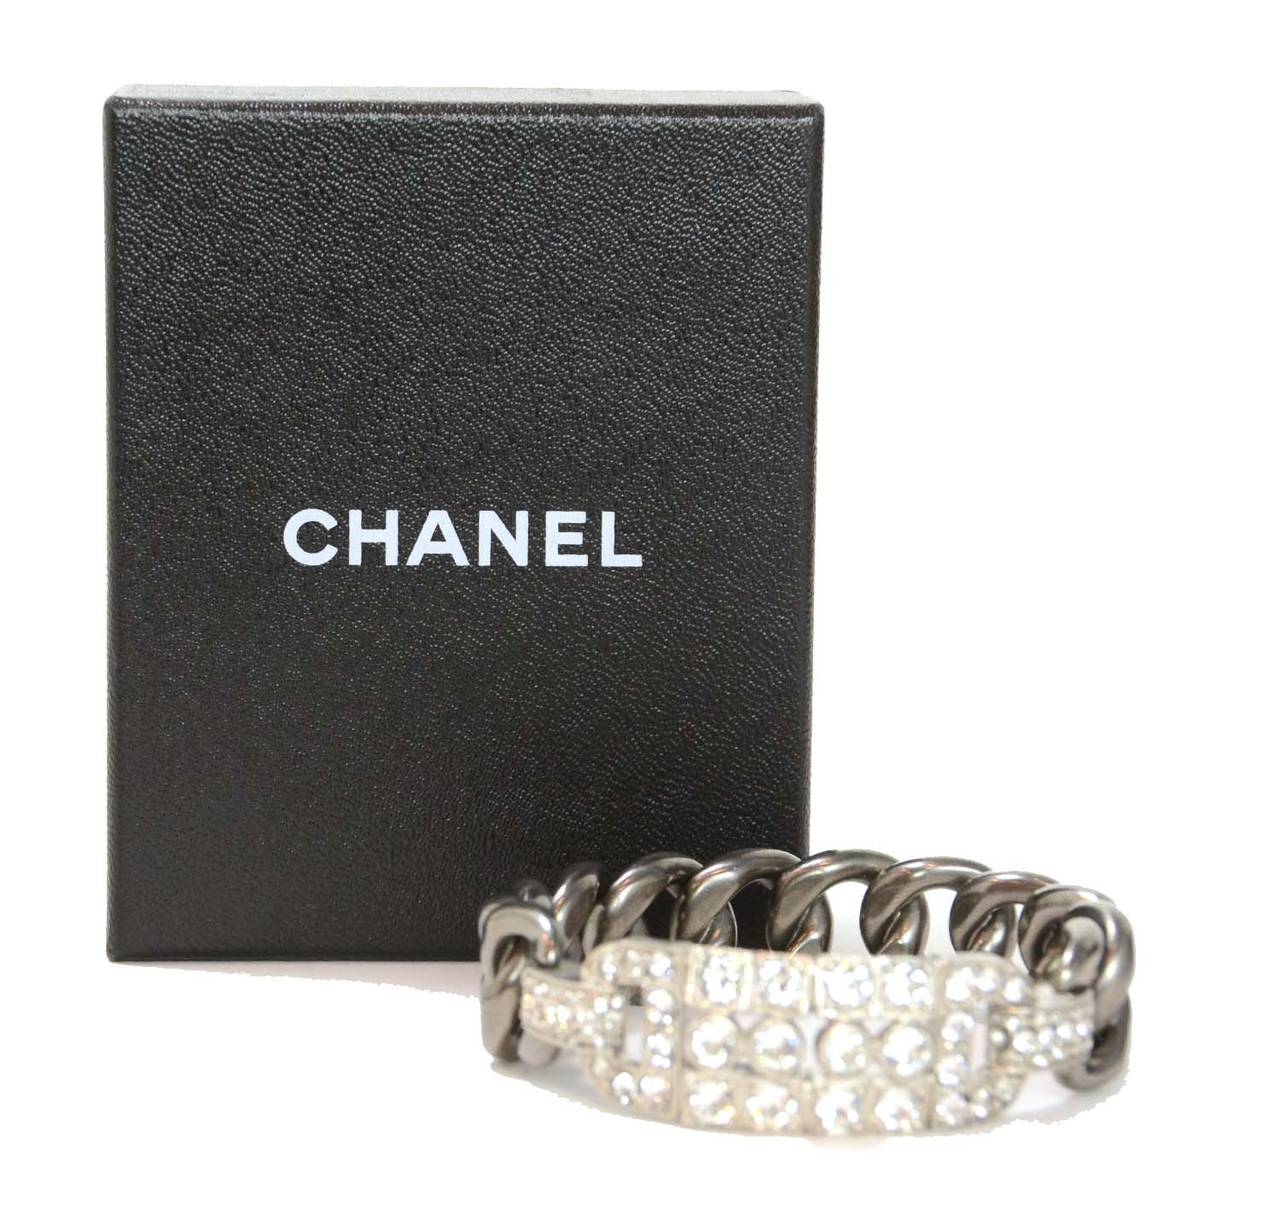 CHANEL '14 Brushed Gun Metal Chain-Link Bangle w/ Crystals 3